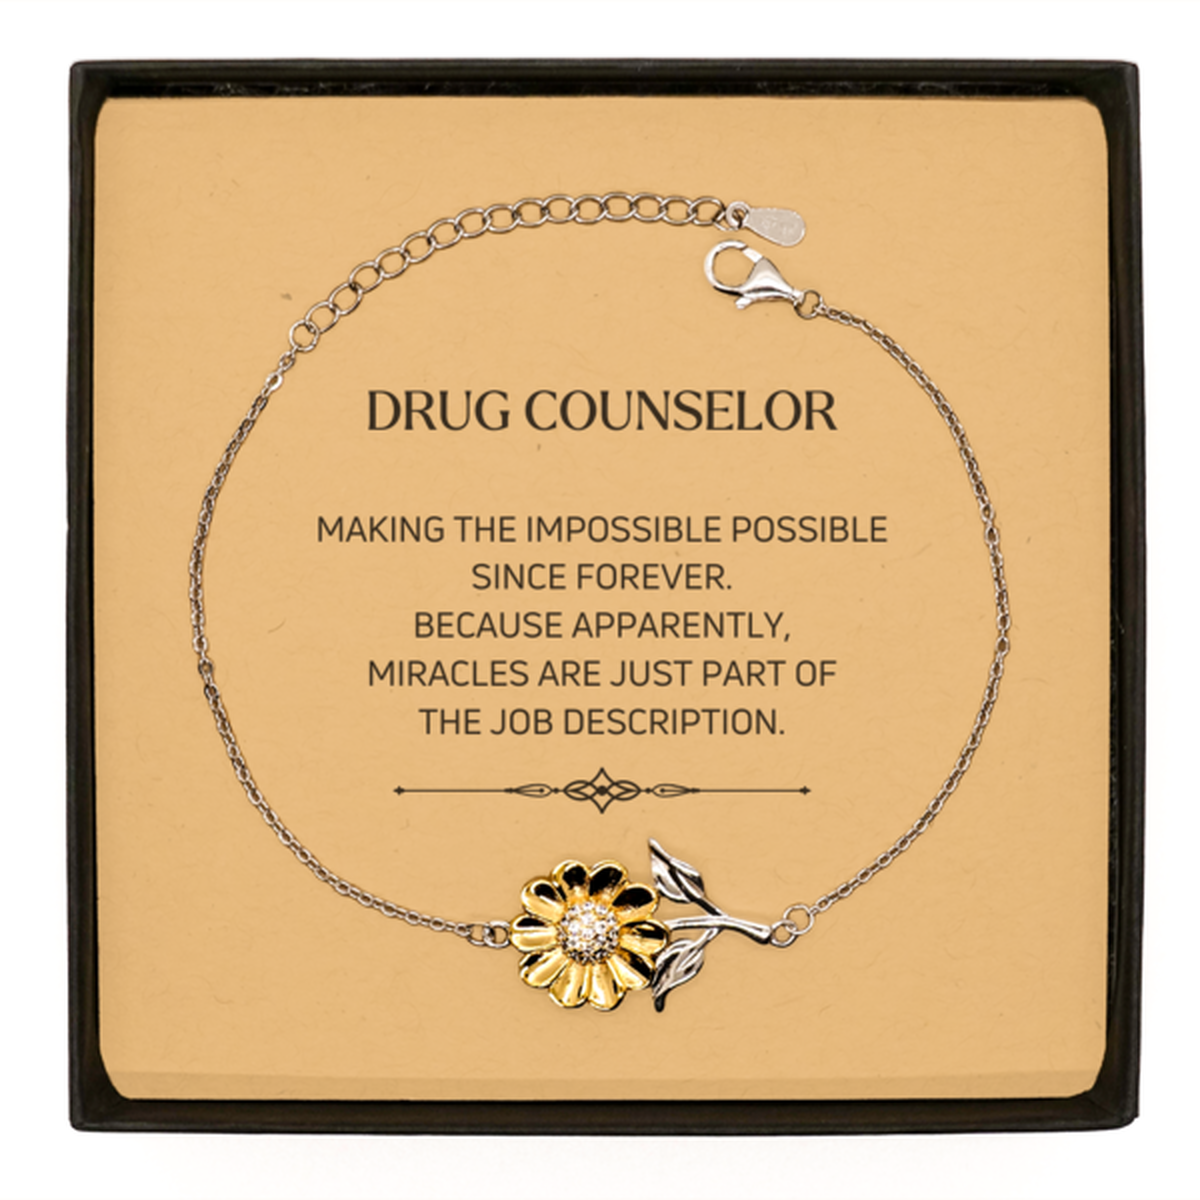 Funny Drug Counselor Gifts, Miracles are just part of the job description, Inspirational Birthday Sunflower Bracelet For Drug Counselor, Men, Women, Coworkers, Friends, Boss